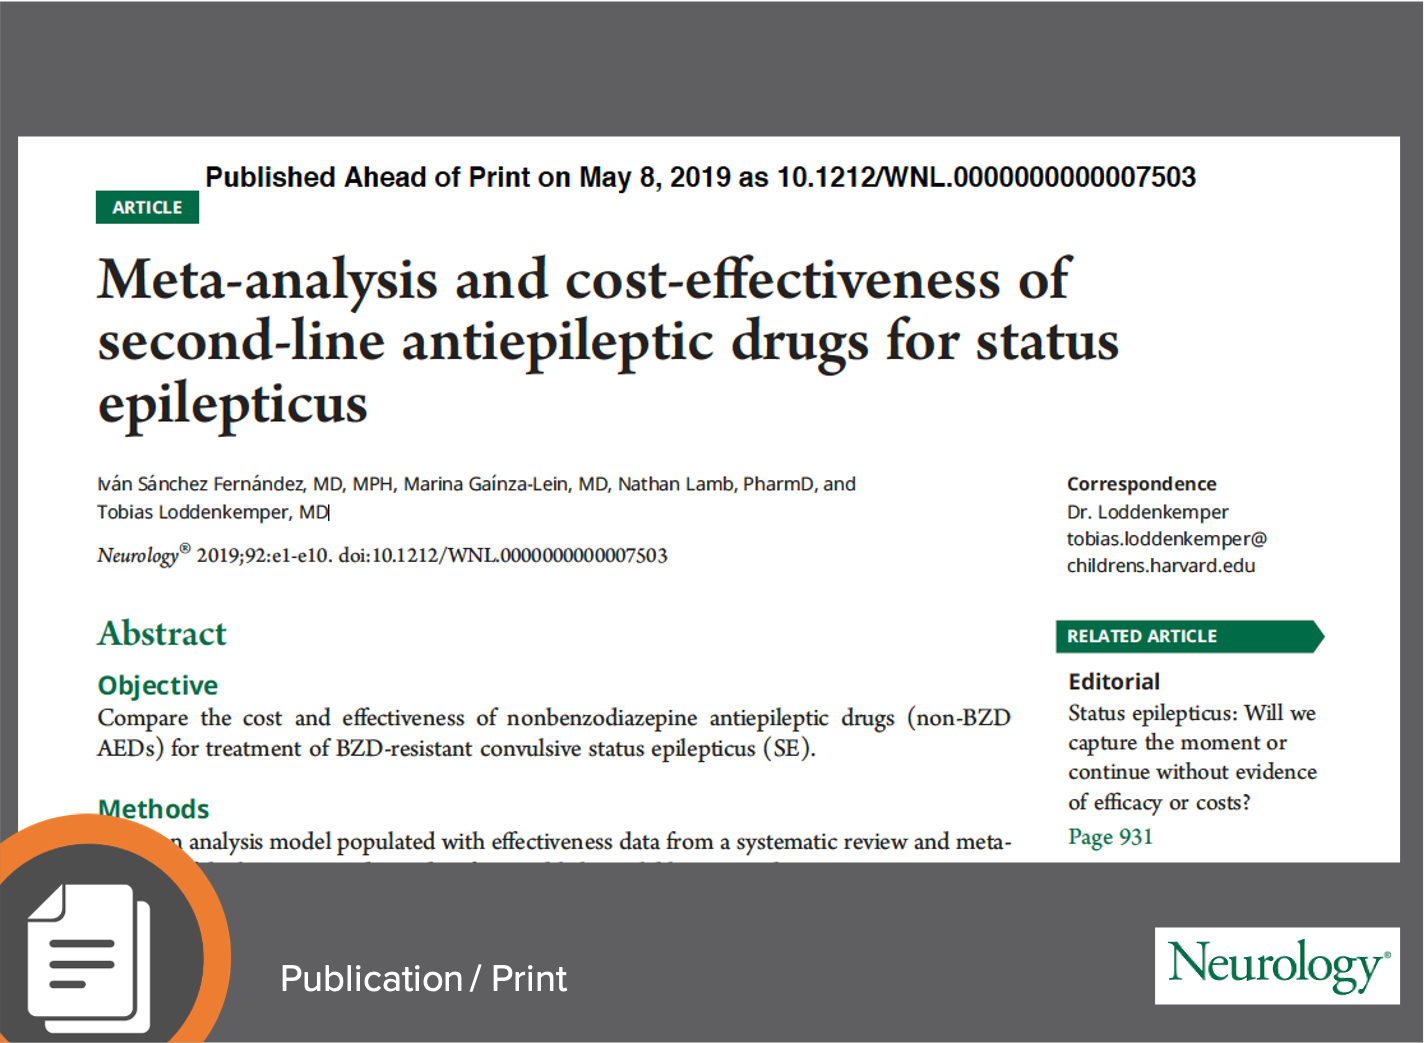 Meta-analysis and Cost-effectiveness of Second-line Antiepileptic Drugs for Status Epilepticus